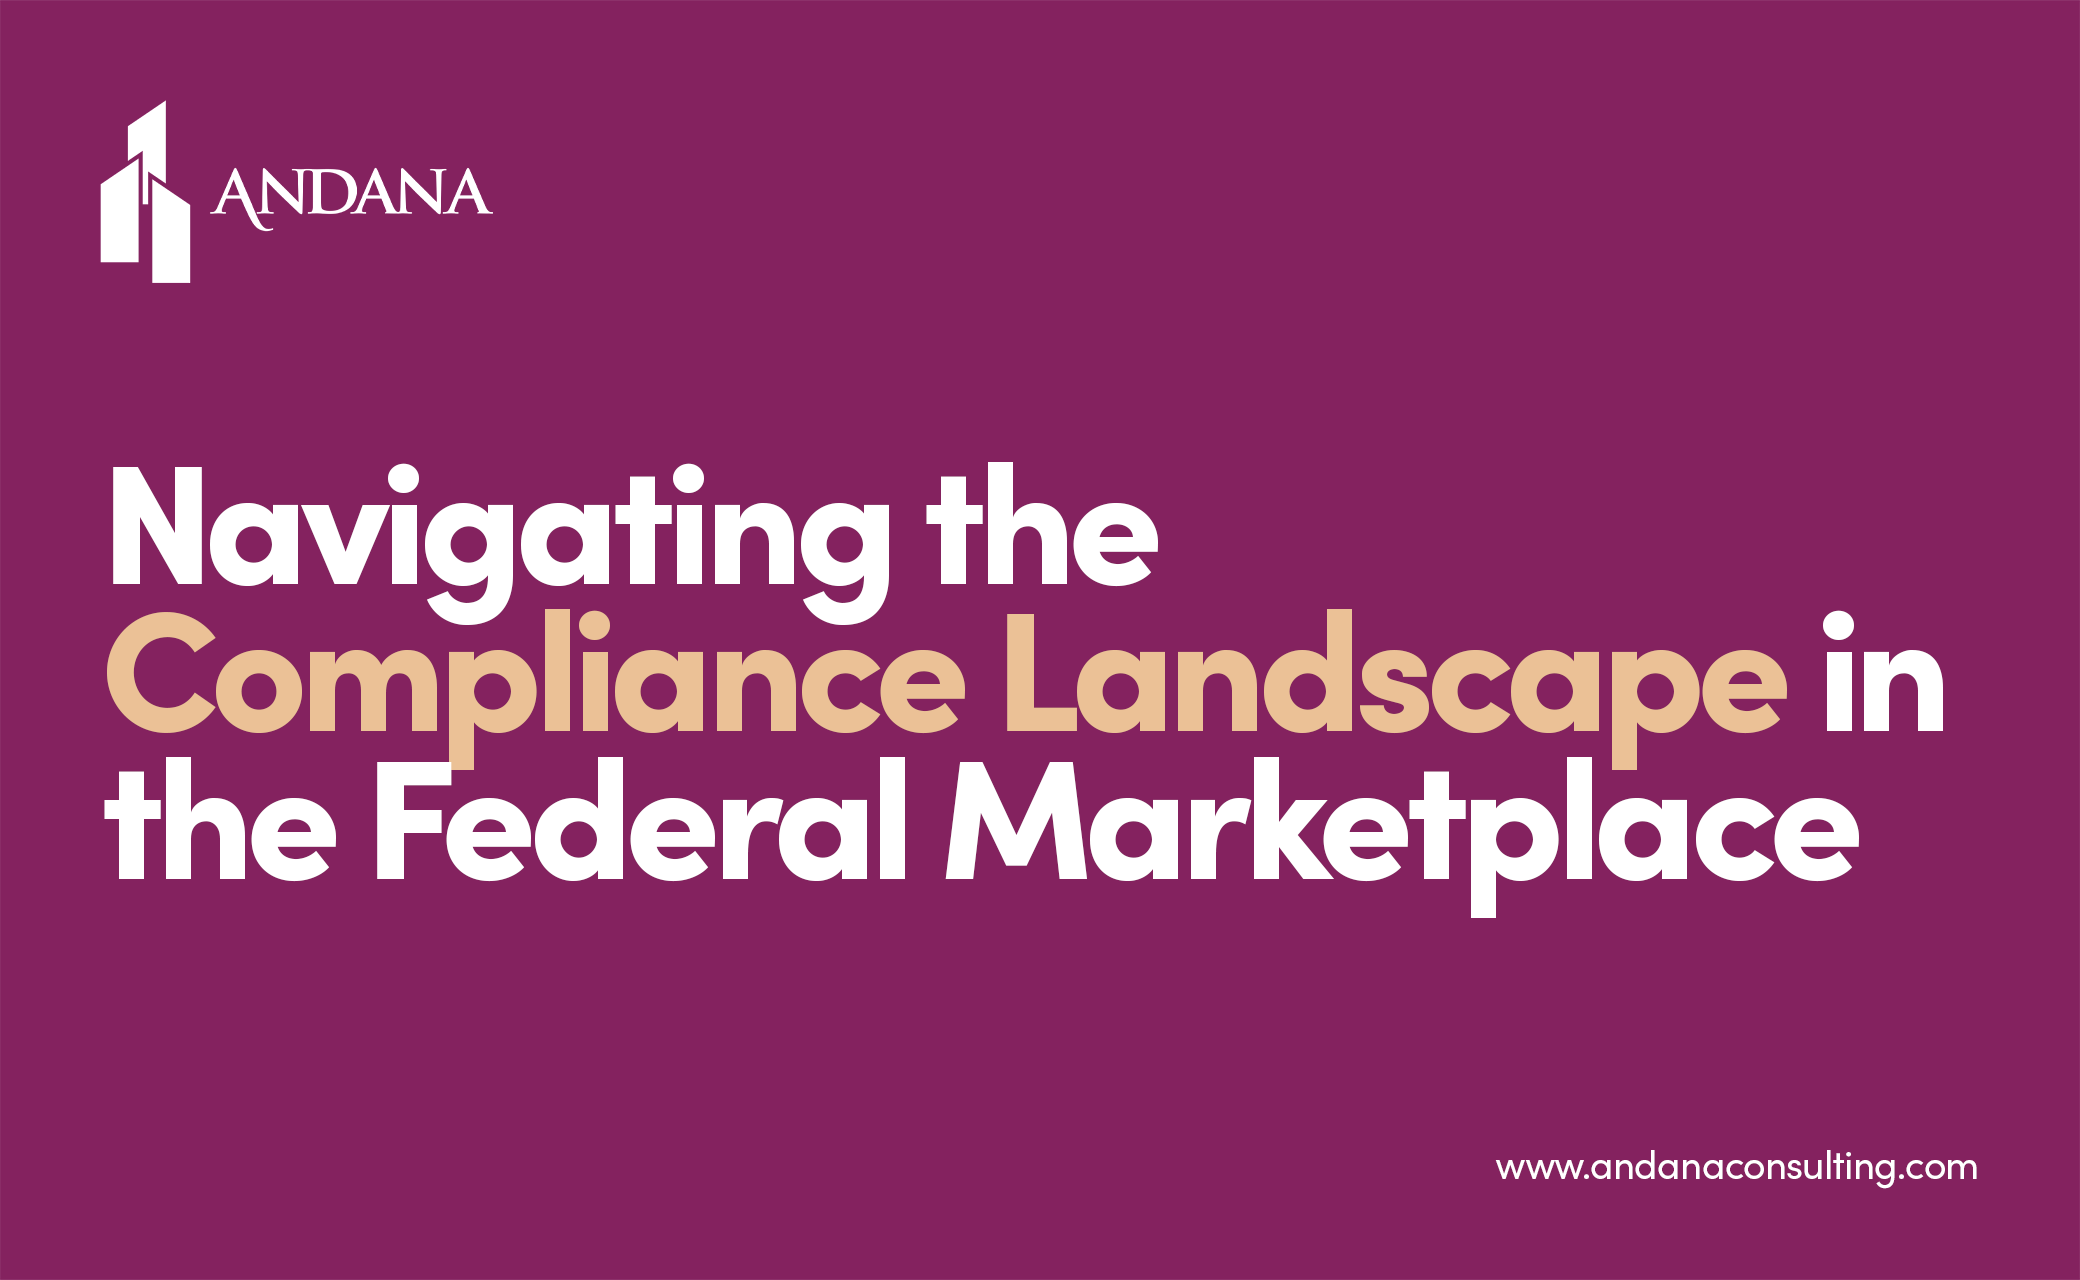 Navigating the Compliance Landscape in the Federal Marketplace